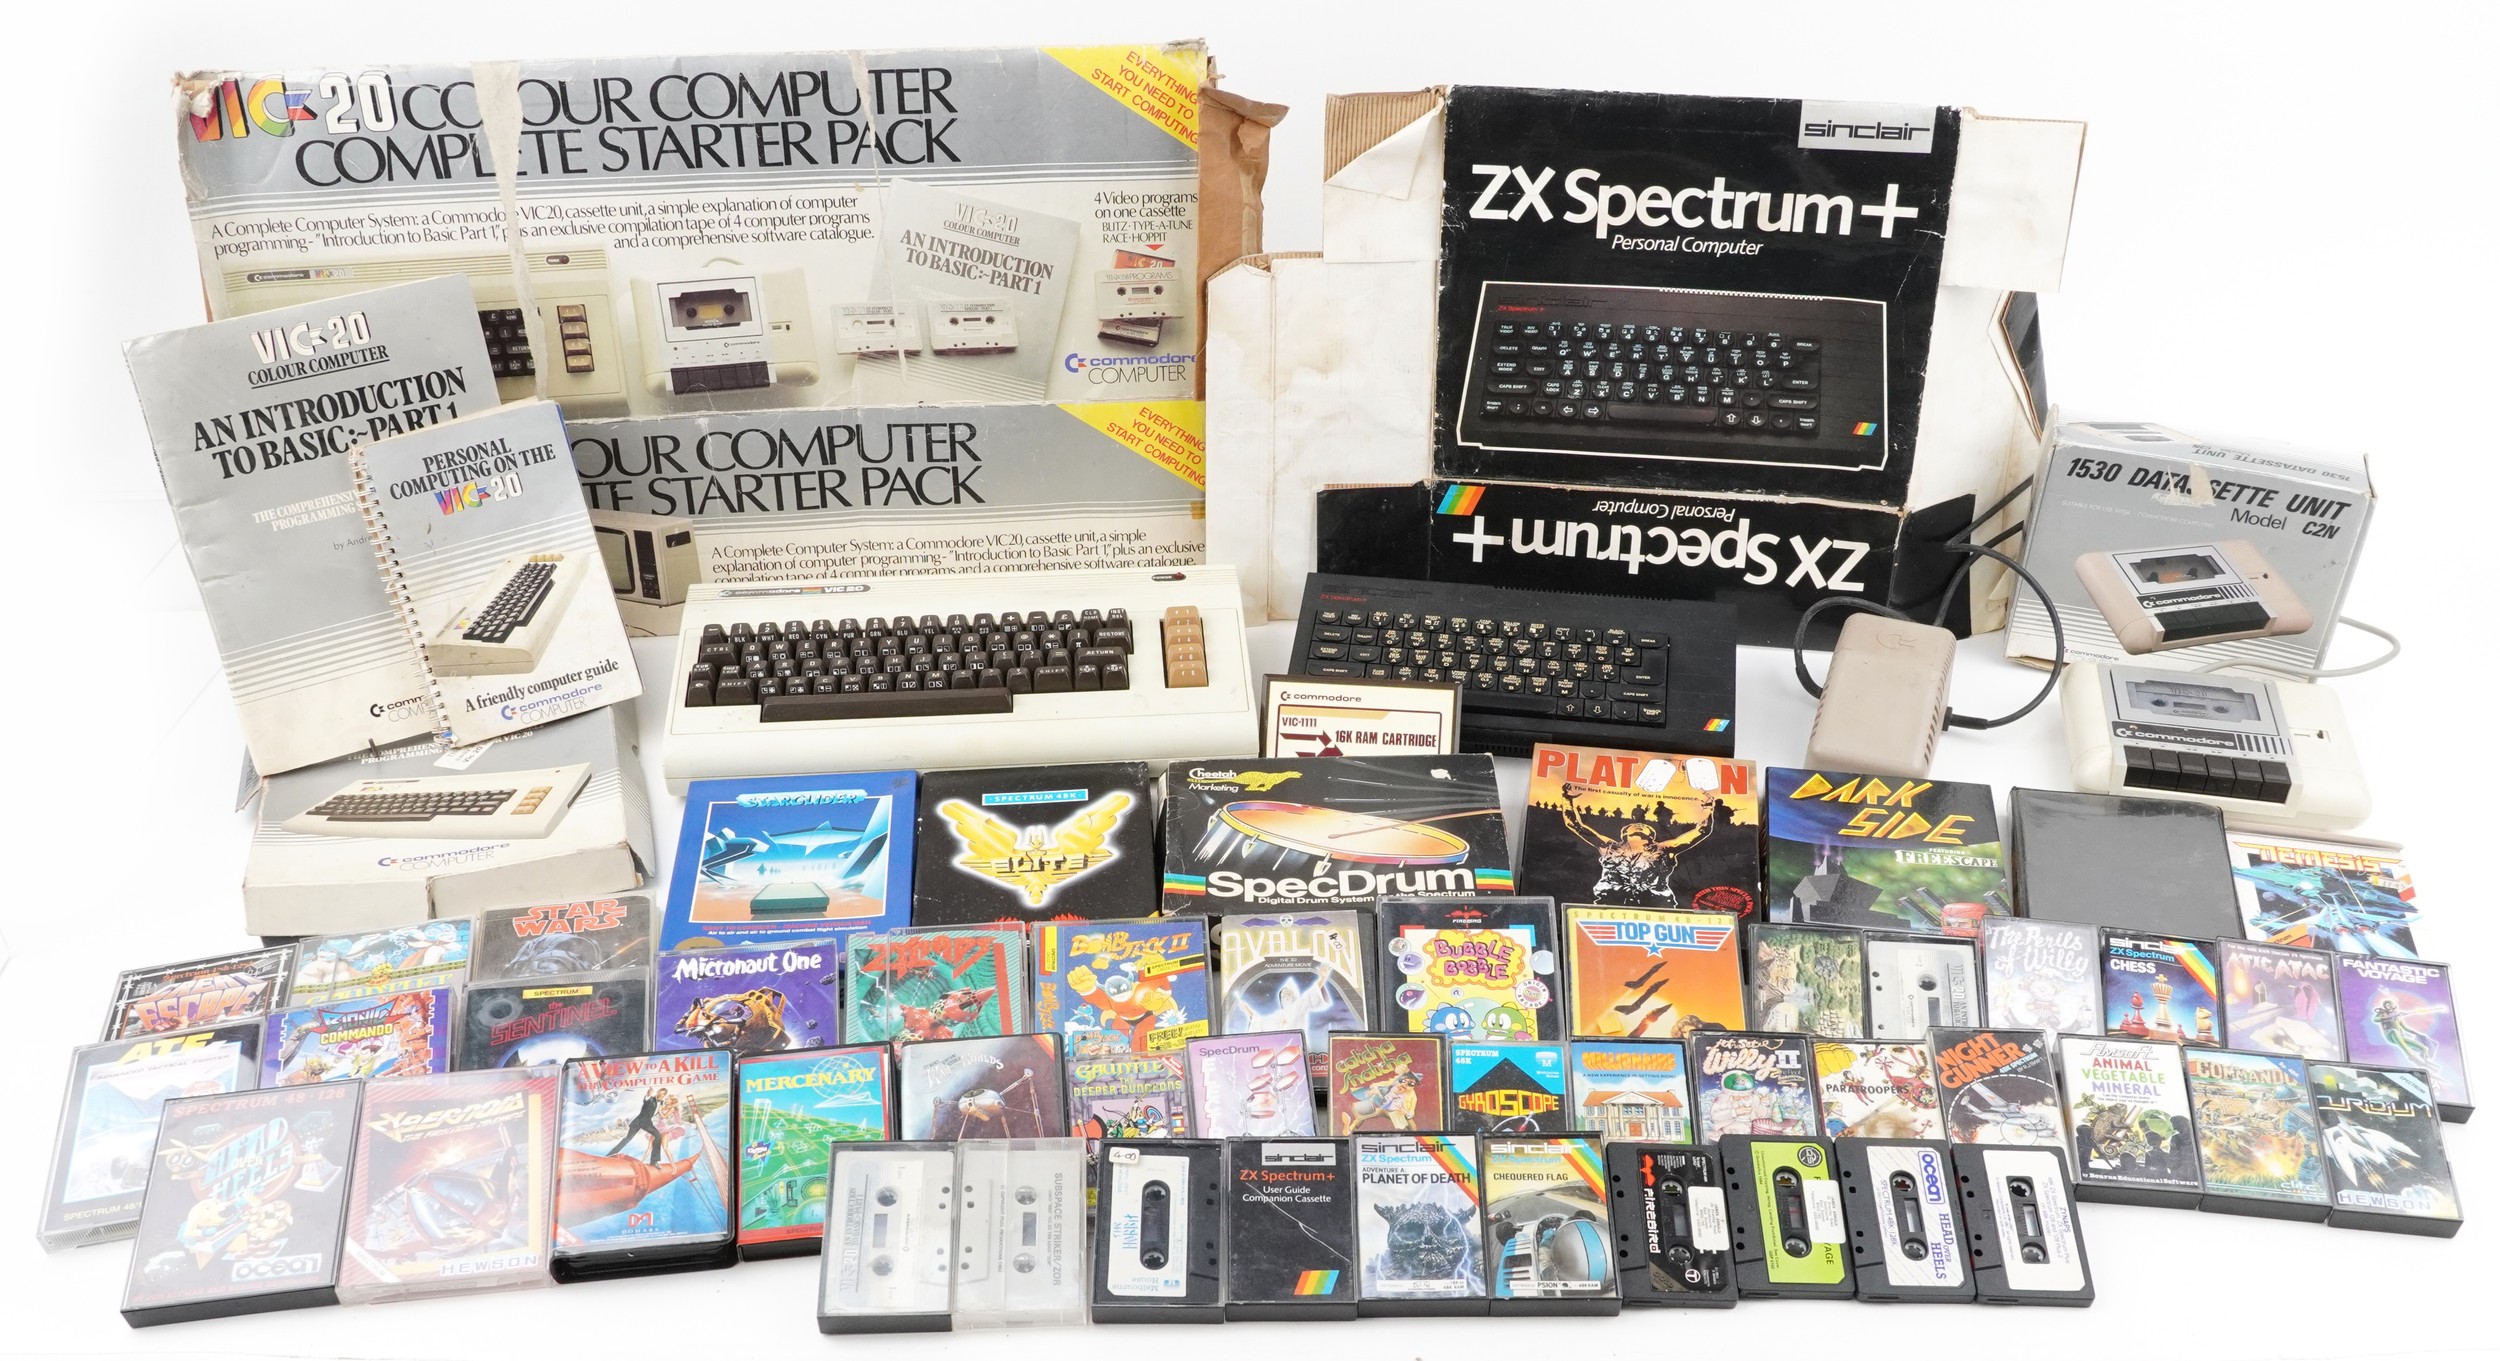 Commodore ZX Spectrum personal computer with accessories and games including 1530 Datasette unit